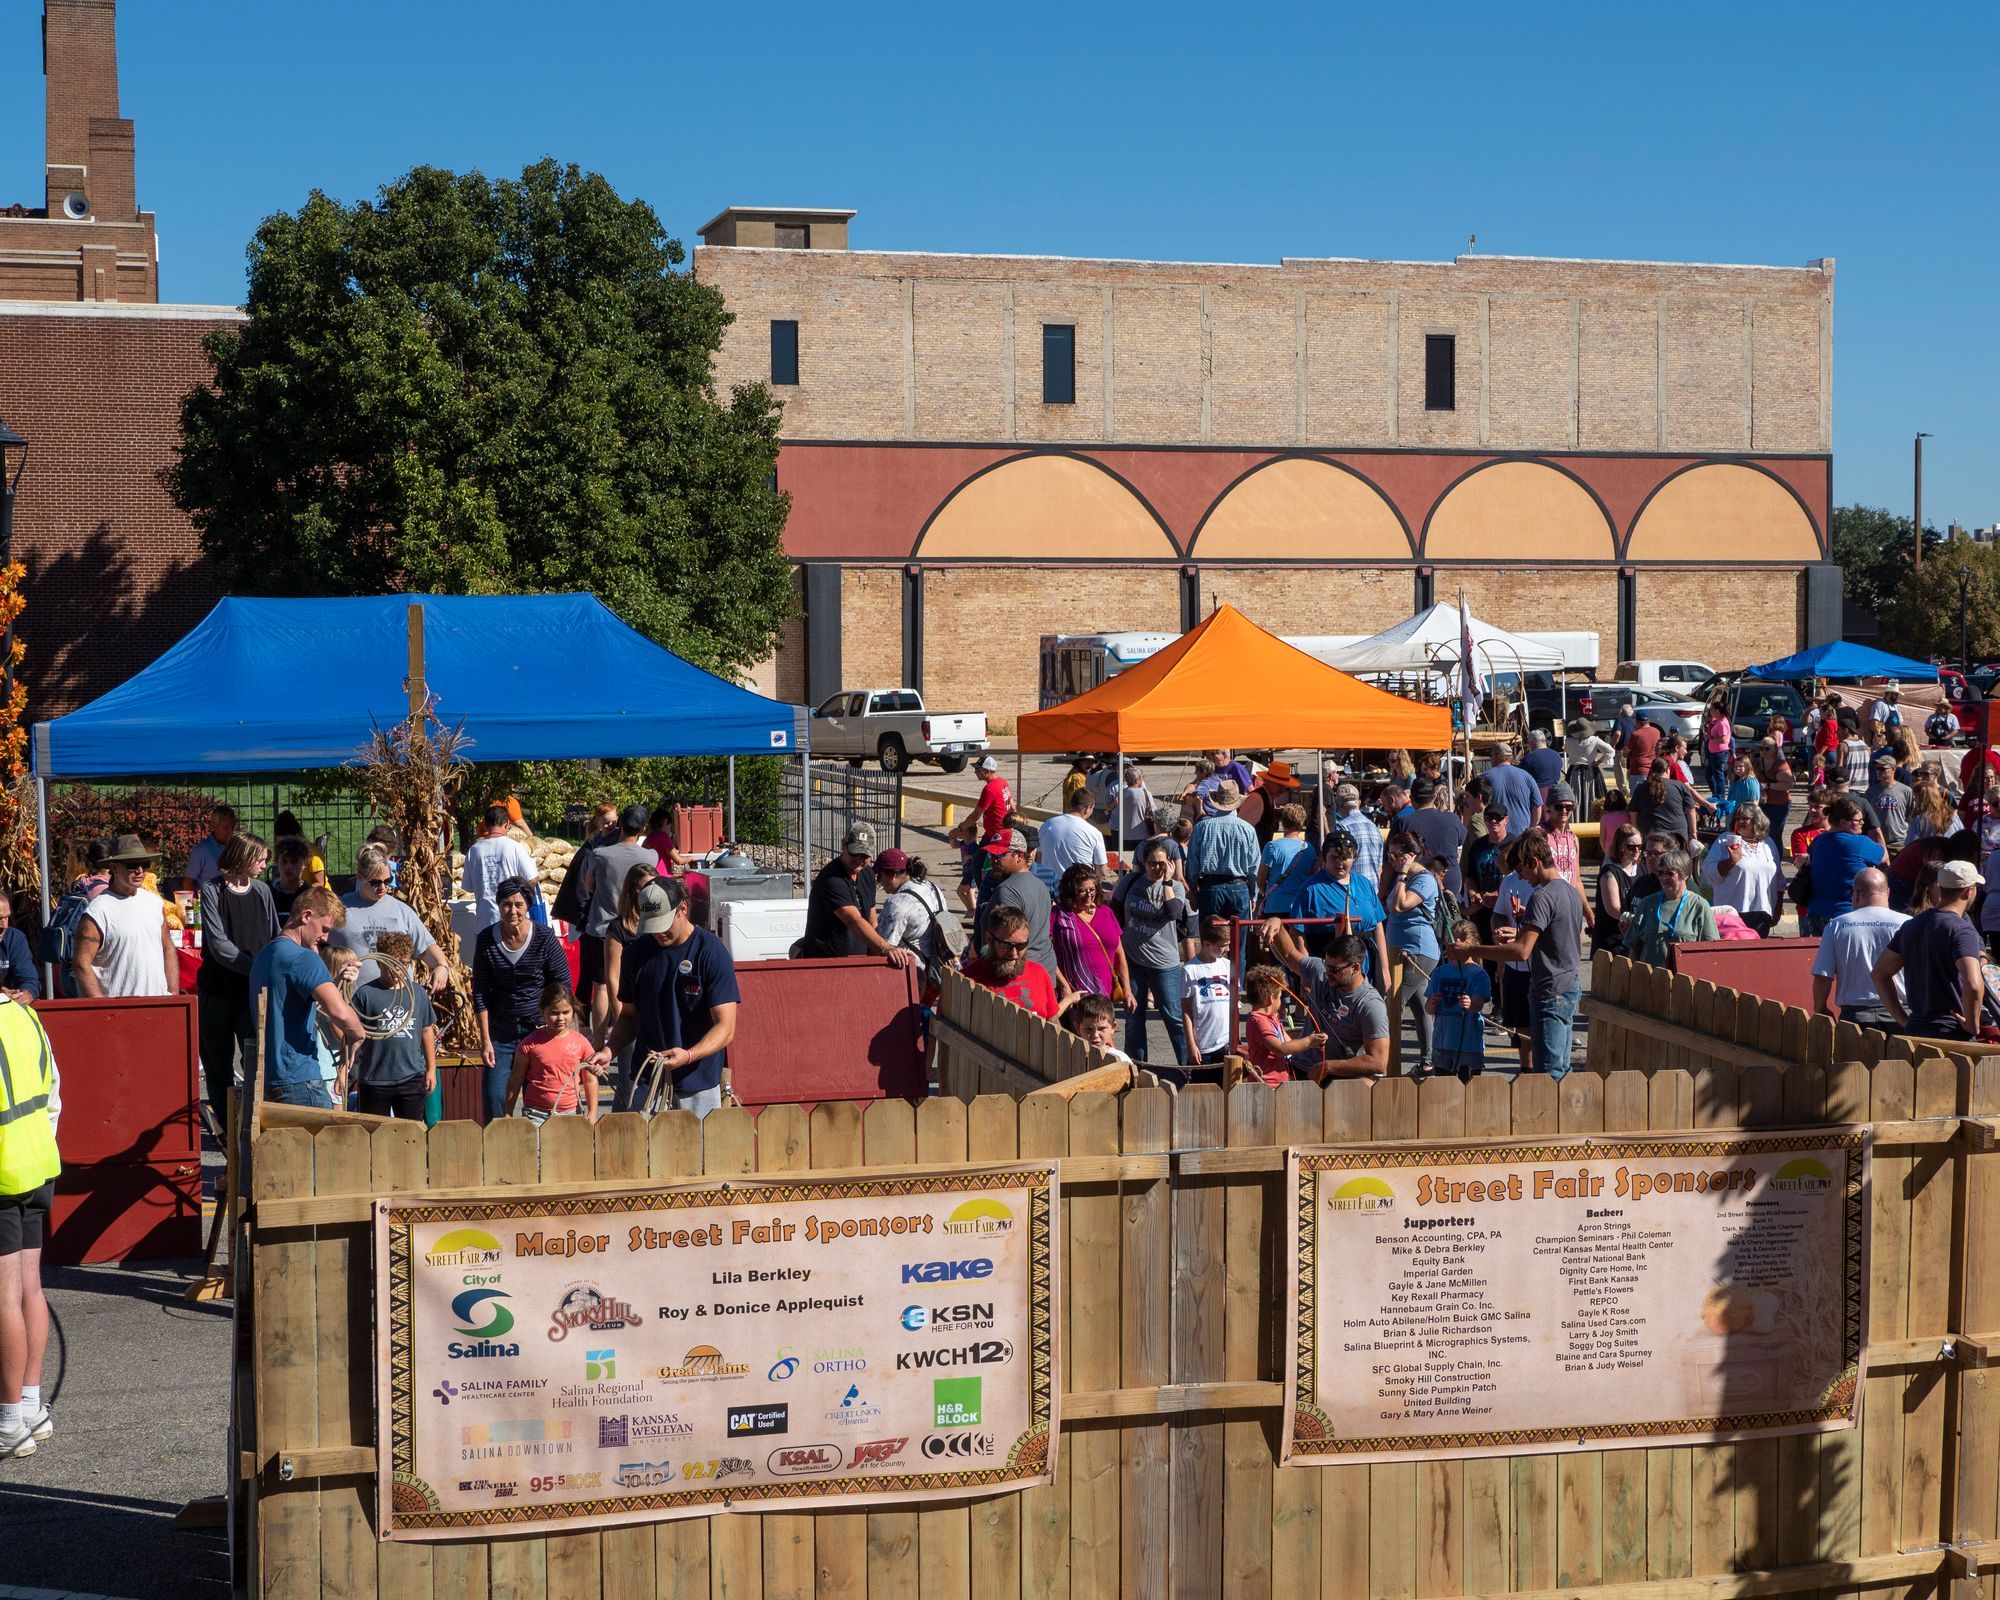 Smoky Hill Museum's Street Fair Blends Good Food, Music, and Old